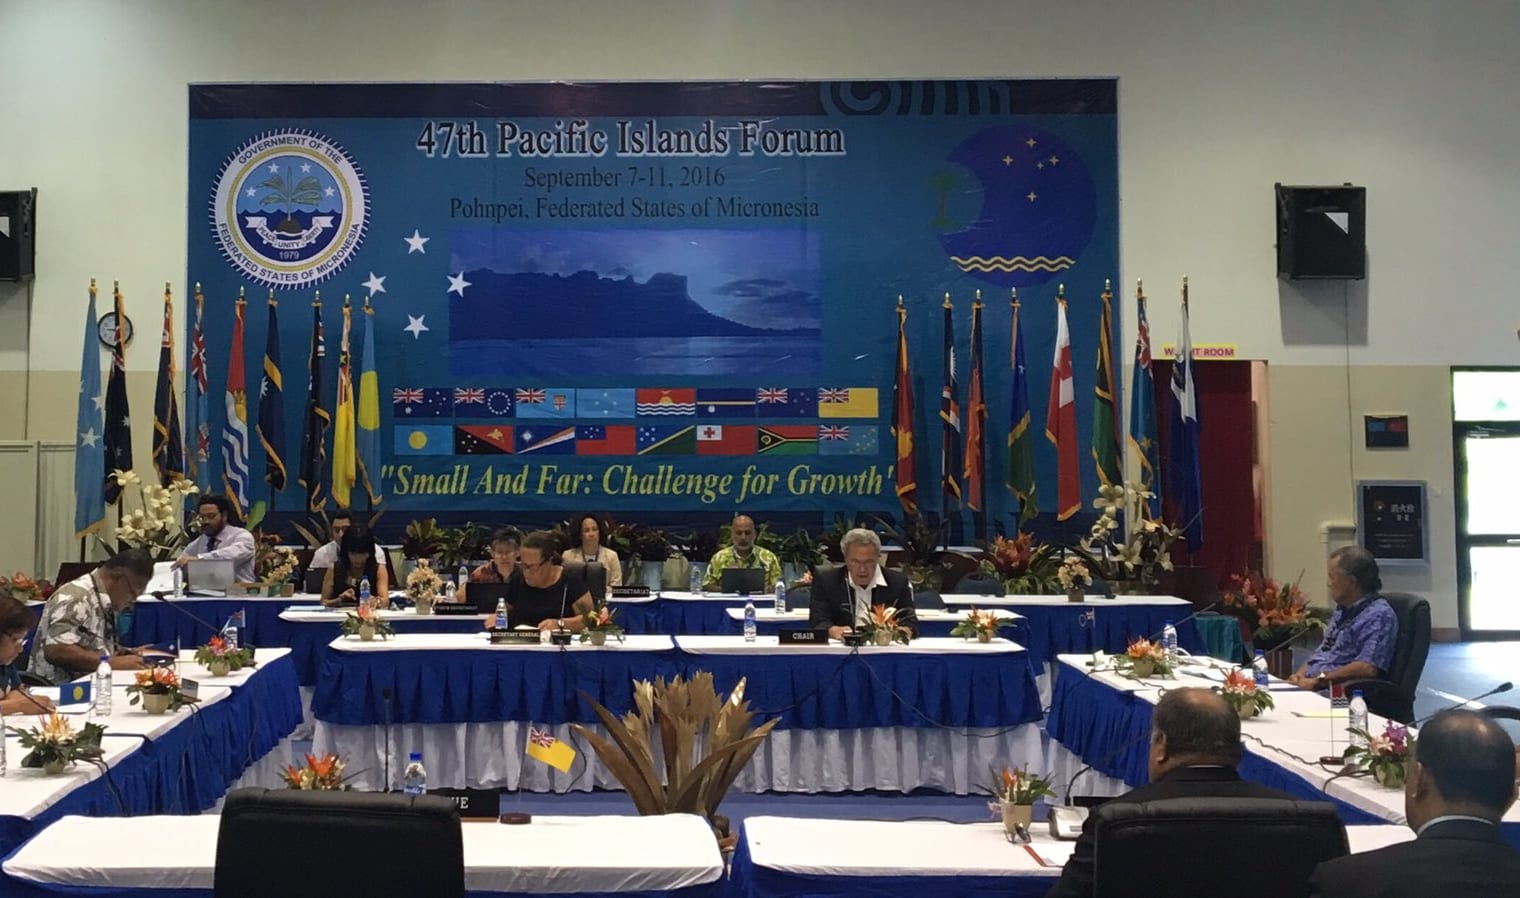 Leaders of the Smaller Island States of the Pacific Islands Forum sit down to meet.